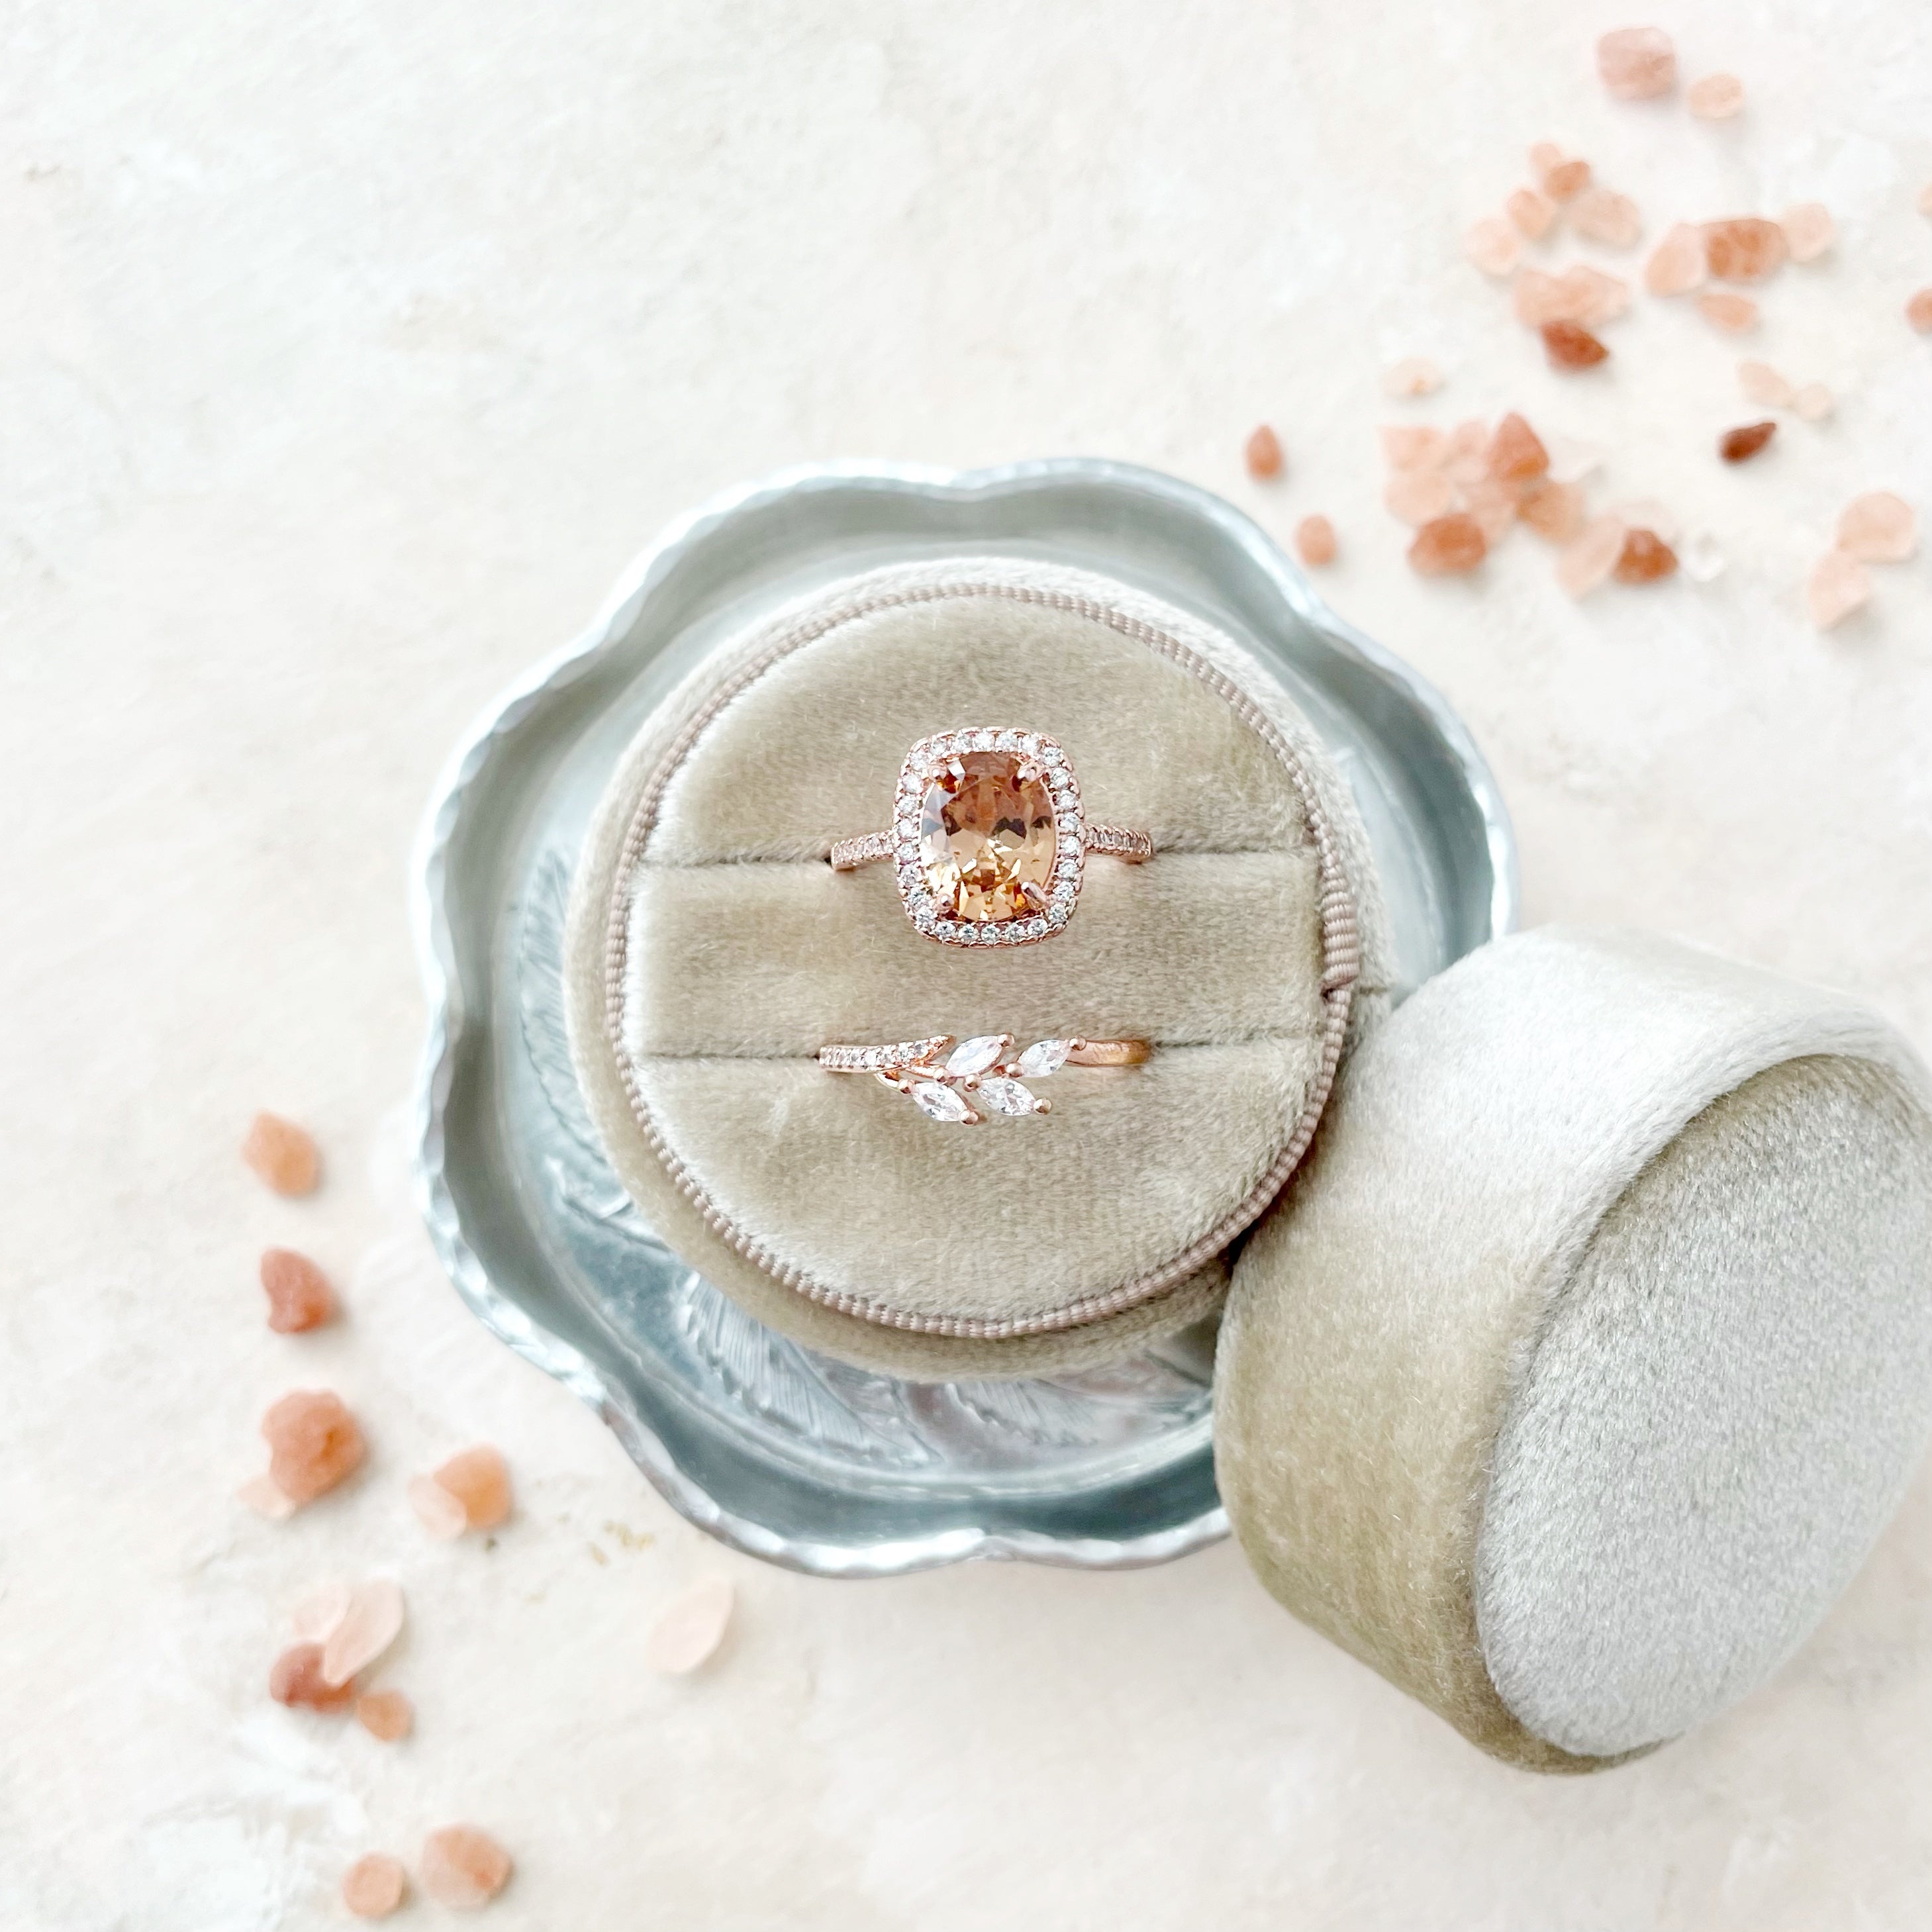 Scalloped sliver dish with tan ring box  - Wedding Flat lay props from Champagne & GRIT